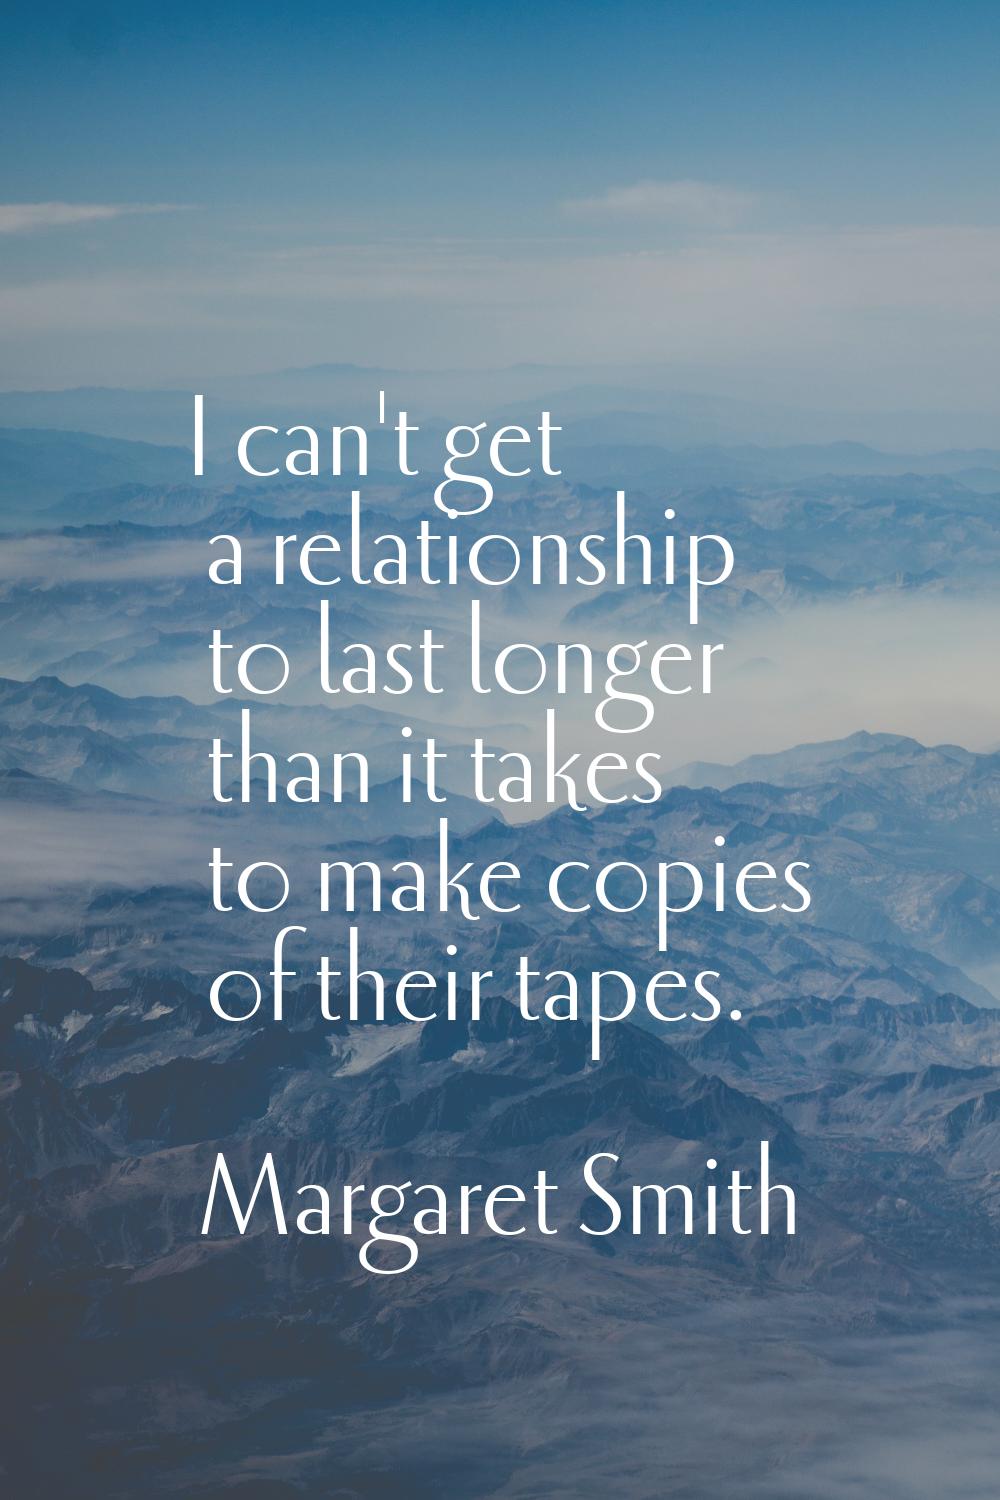 I can't get a relationship to last longer than it takes to make copies of their tapes.